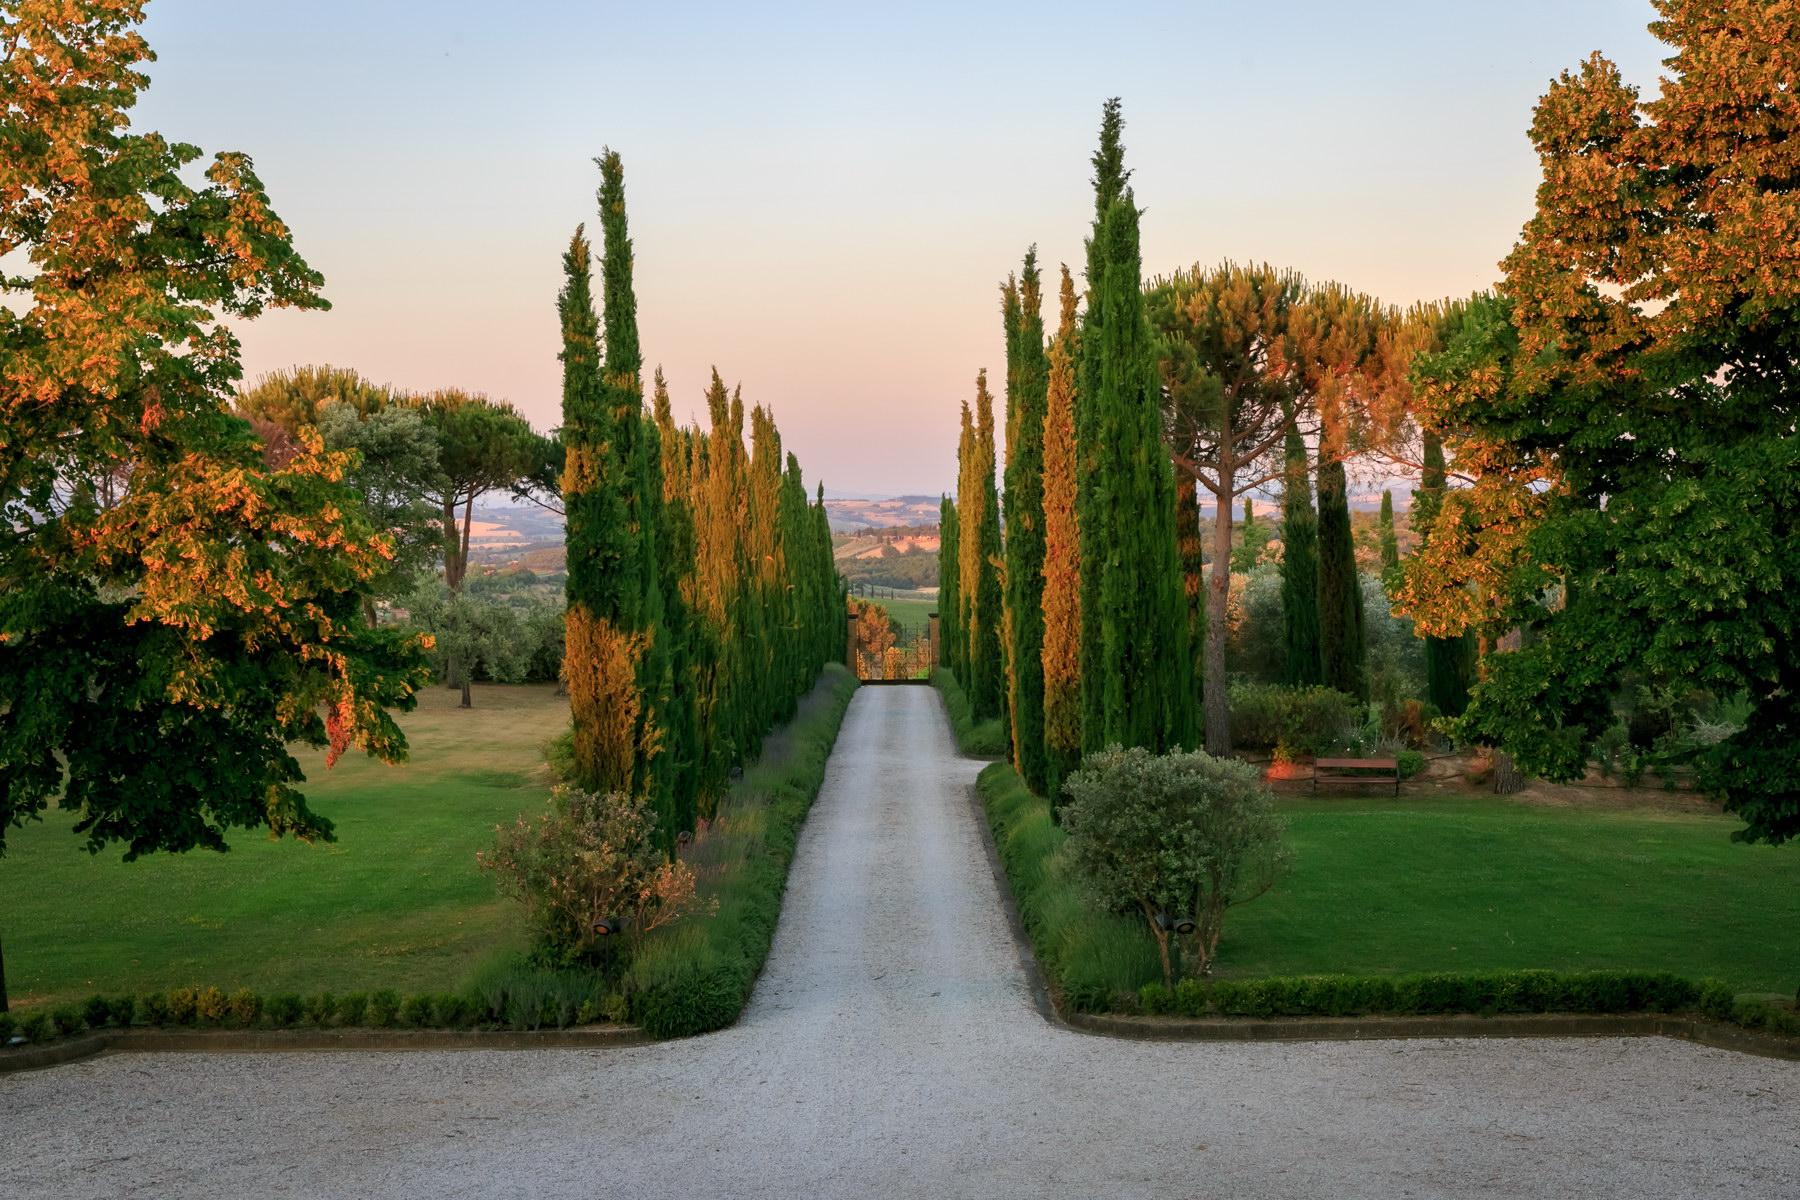 Marvelous villa immersed among the Montepulciano vineyards - 3